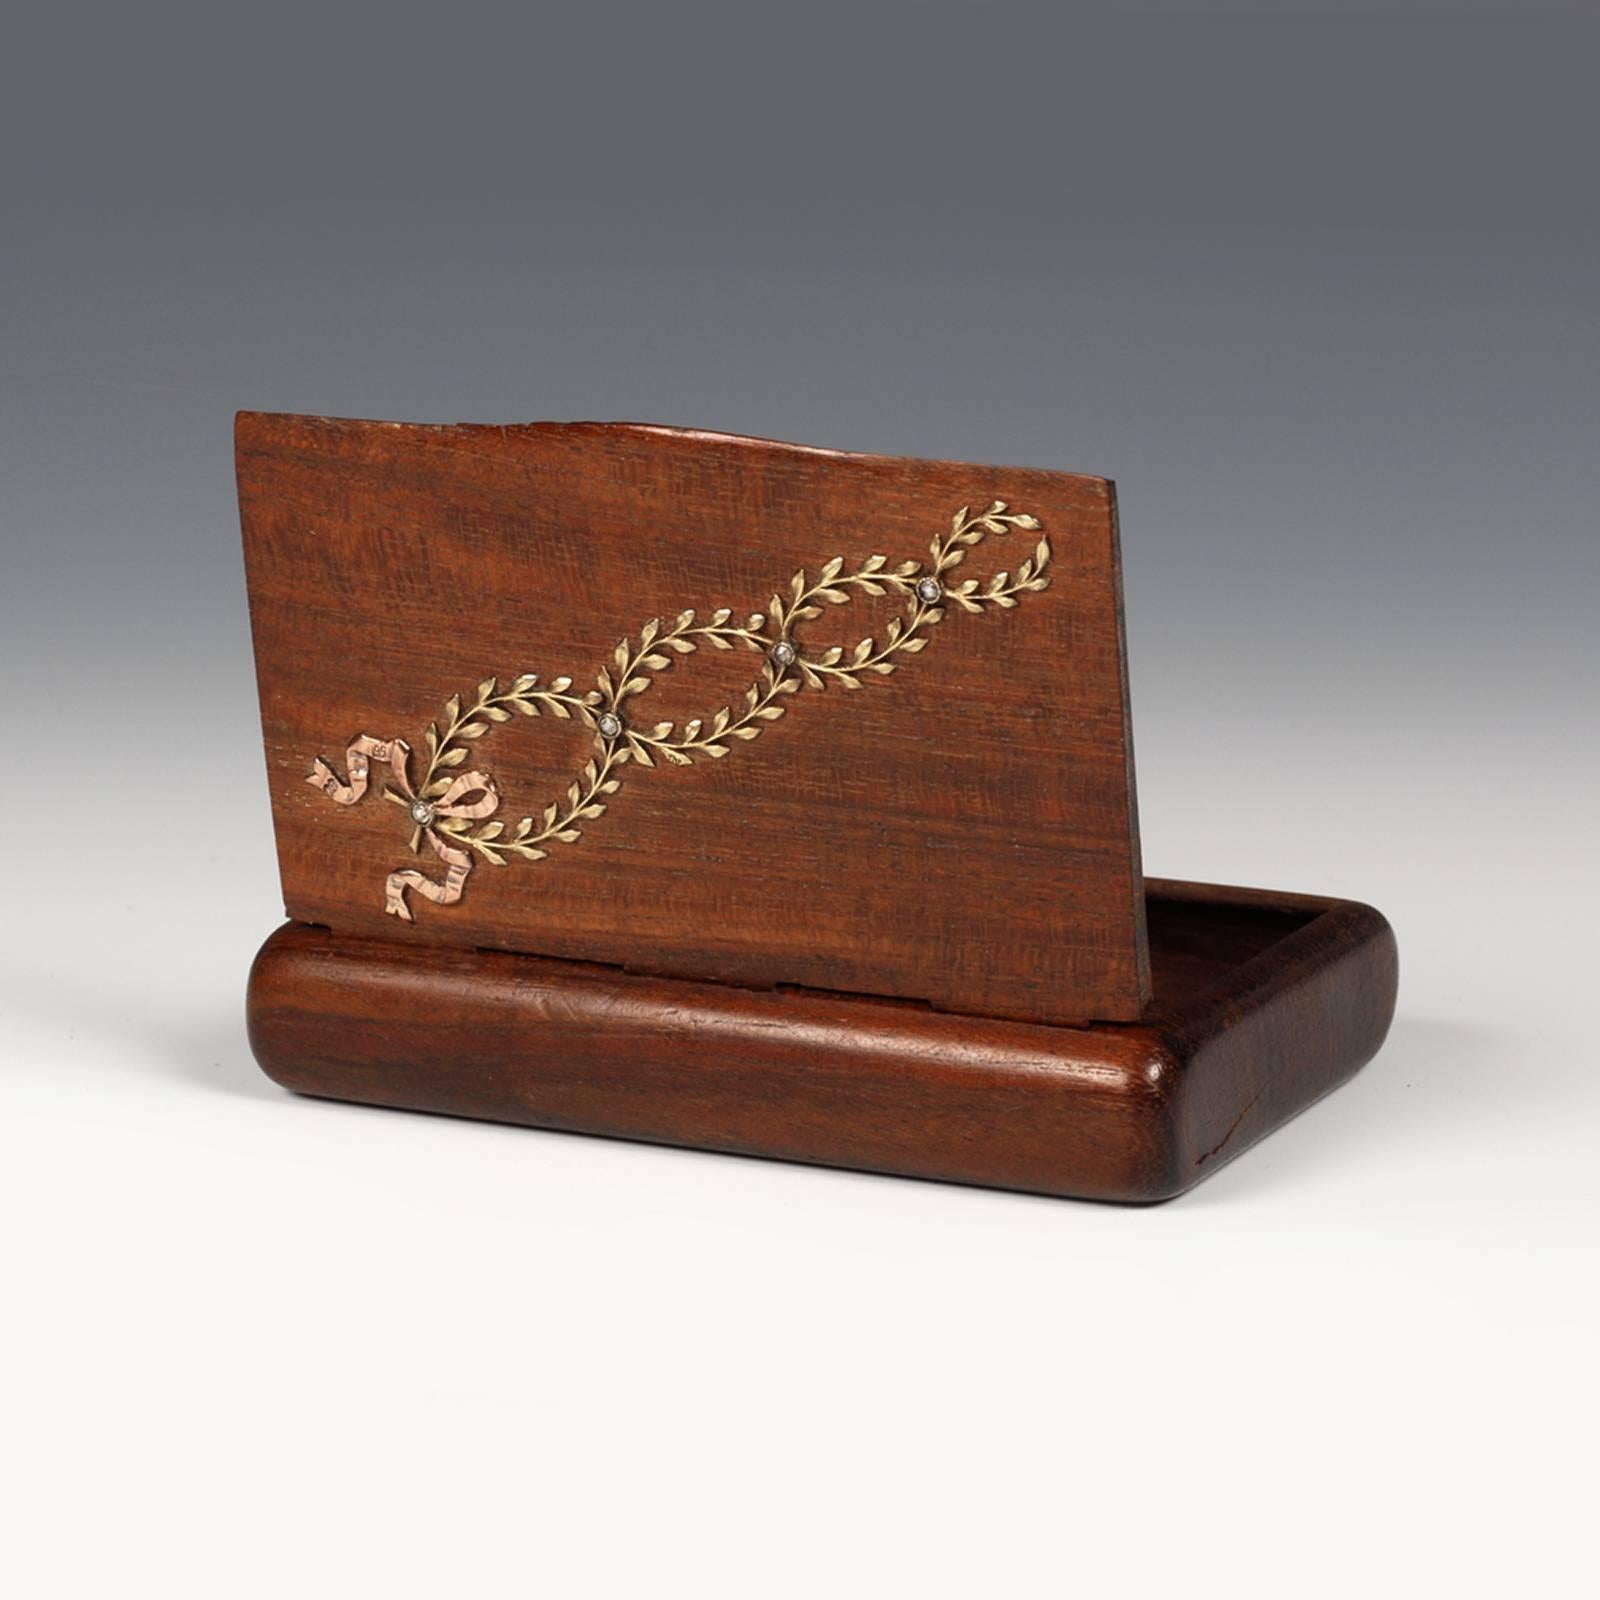 A Fabergé two-color gold-mounted palisander wood cigarette case, Moscow, 1899-1908. The rounded rectangular body carved from palisander wood, decorated in Neo-Classical taste with hinged lid diagonally applied with two interlocking yellow gold